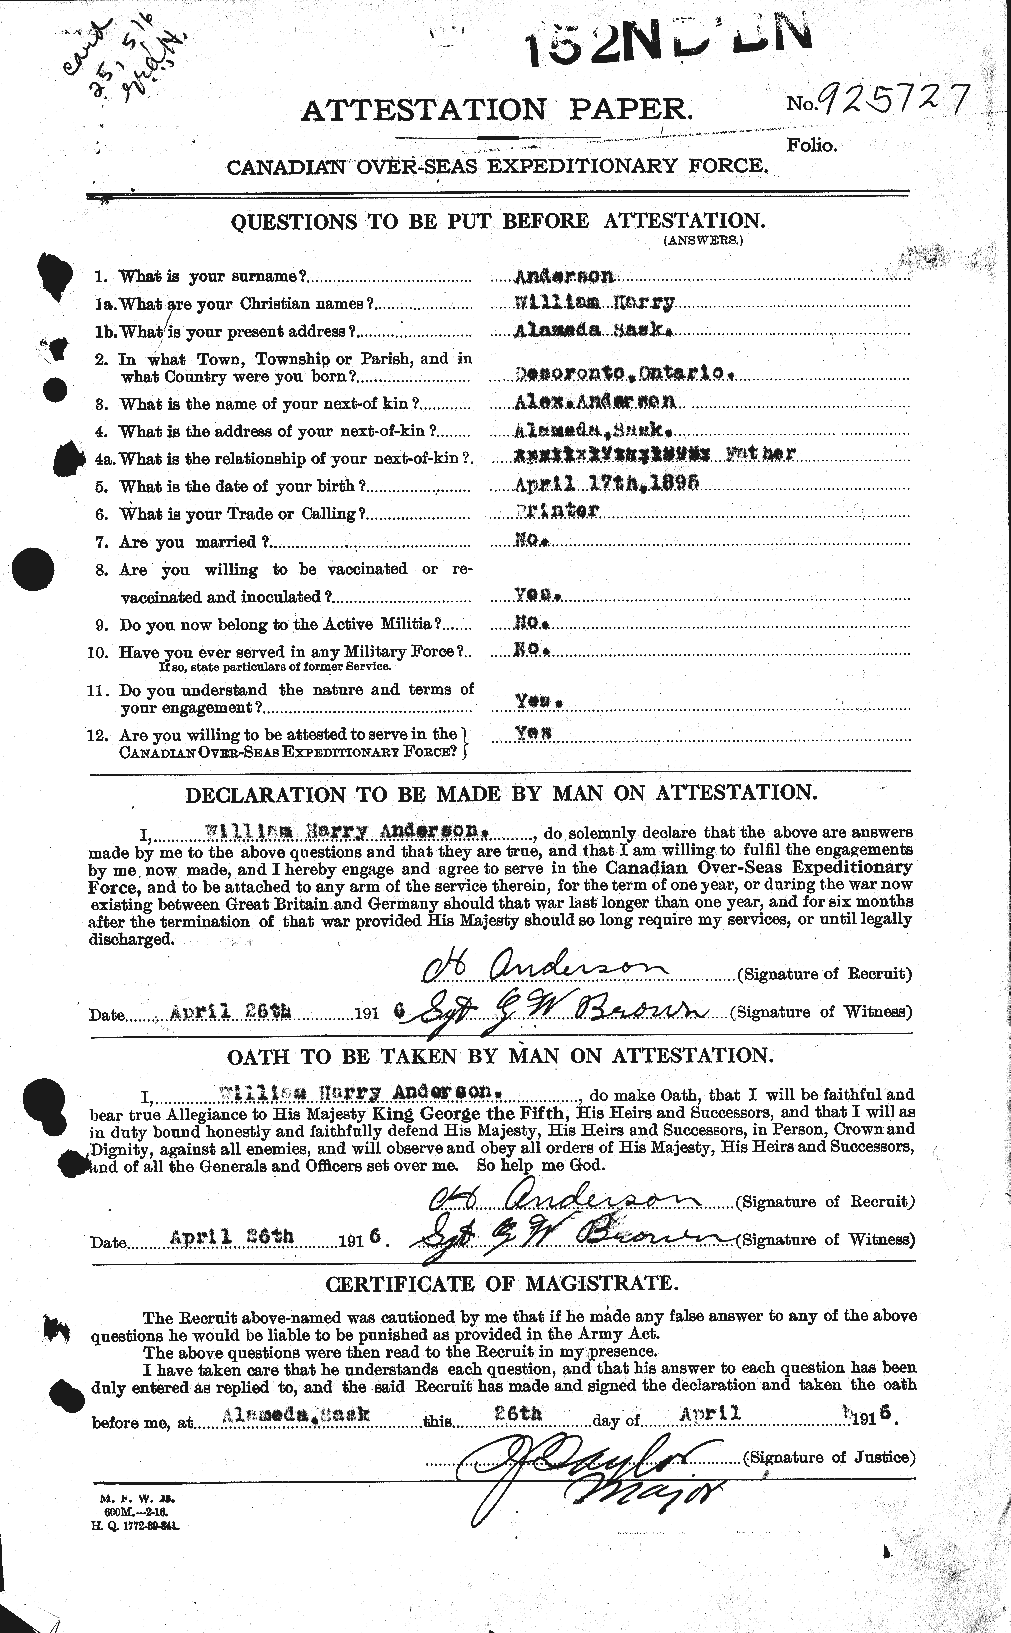 Personnel Records of the First World War - CEF 210800a